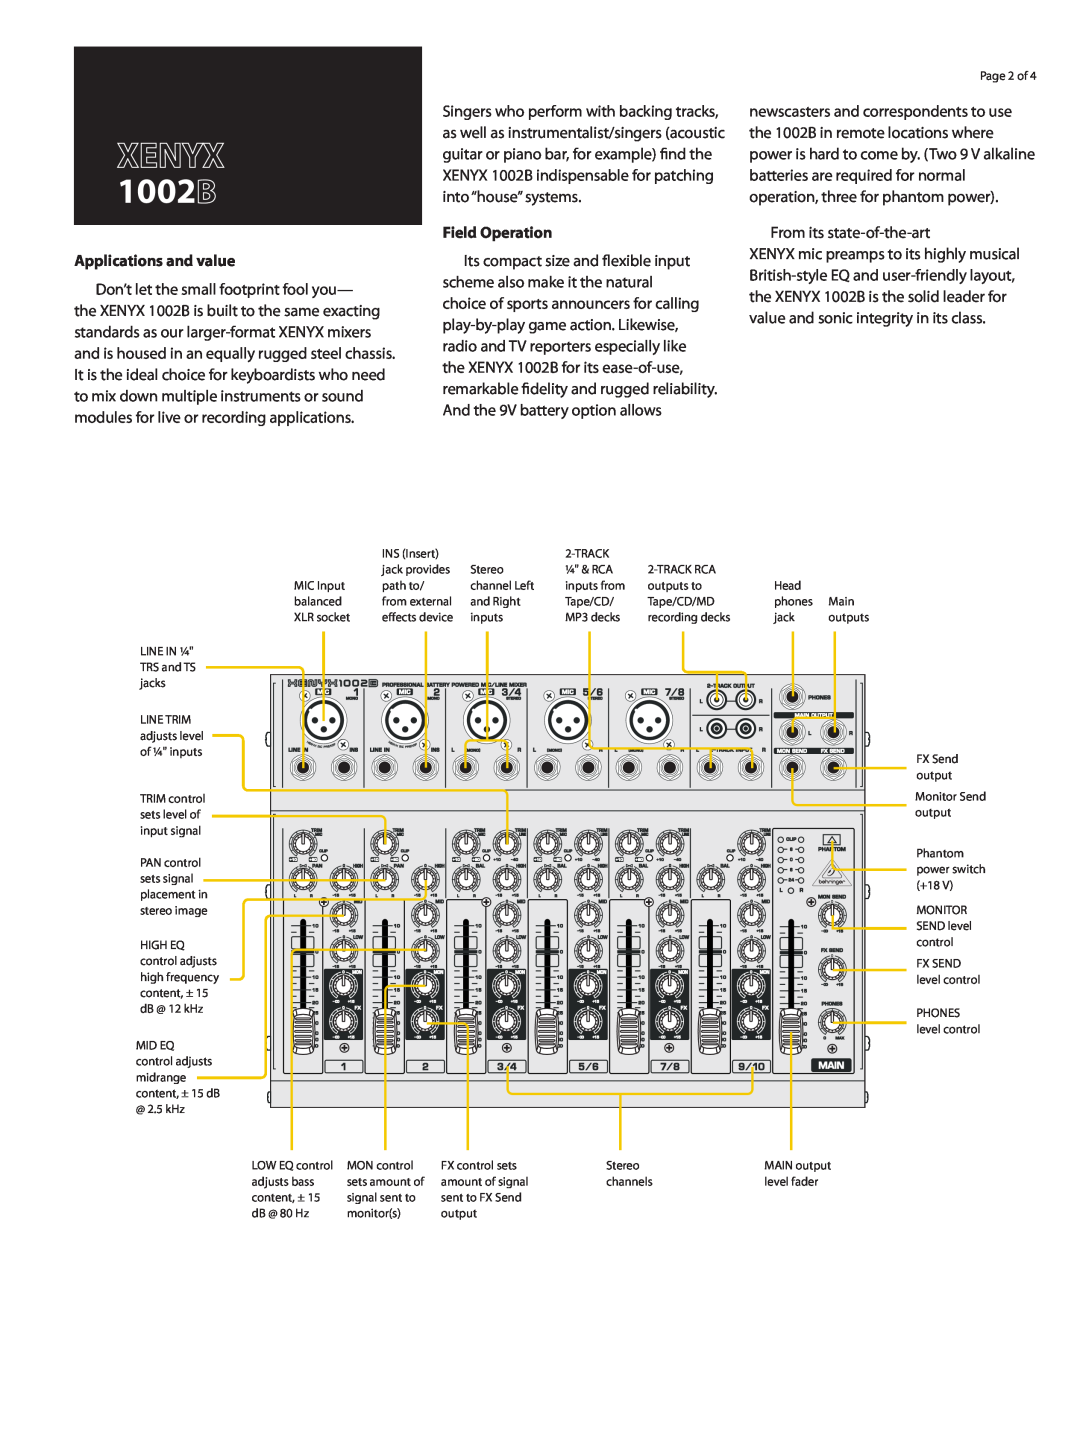 Behringer manual Applications and value, Field Operation, XENYX 1002B, From its state-of-the-art 